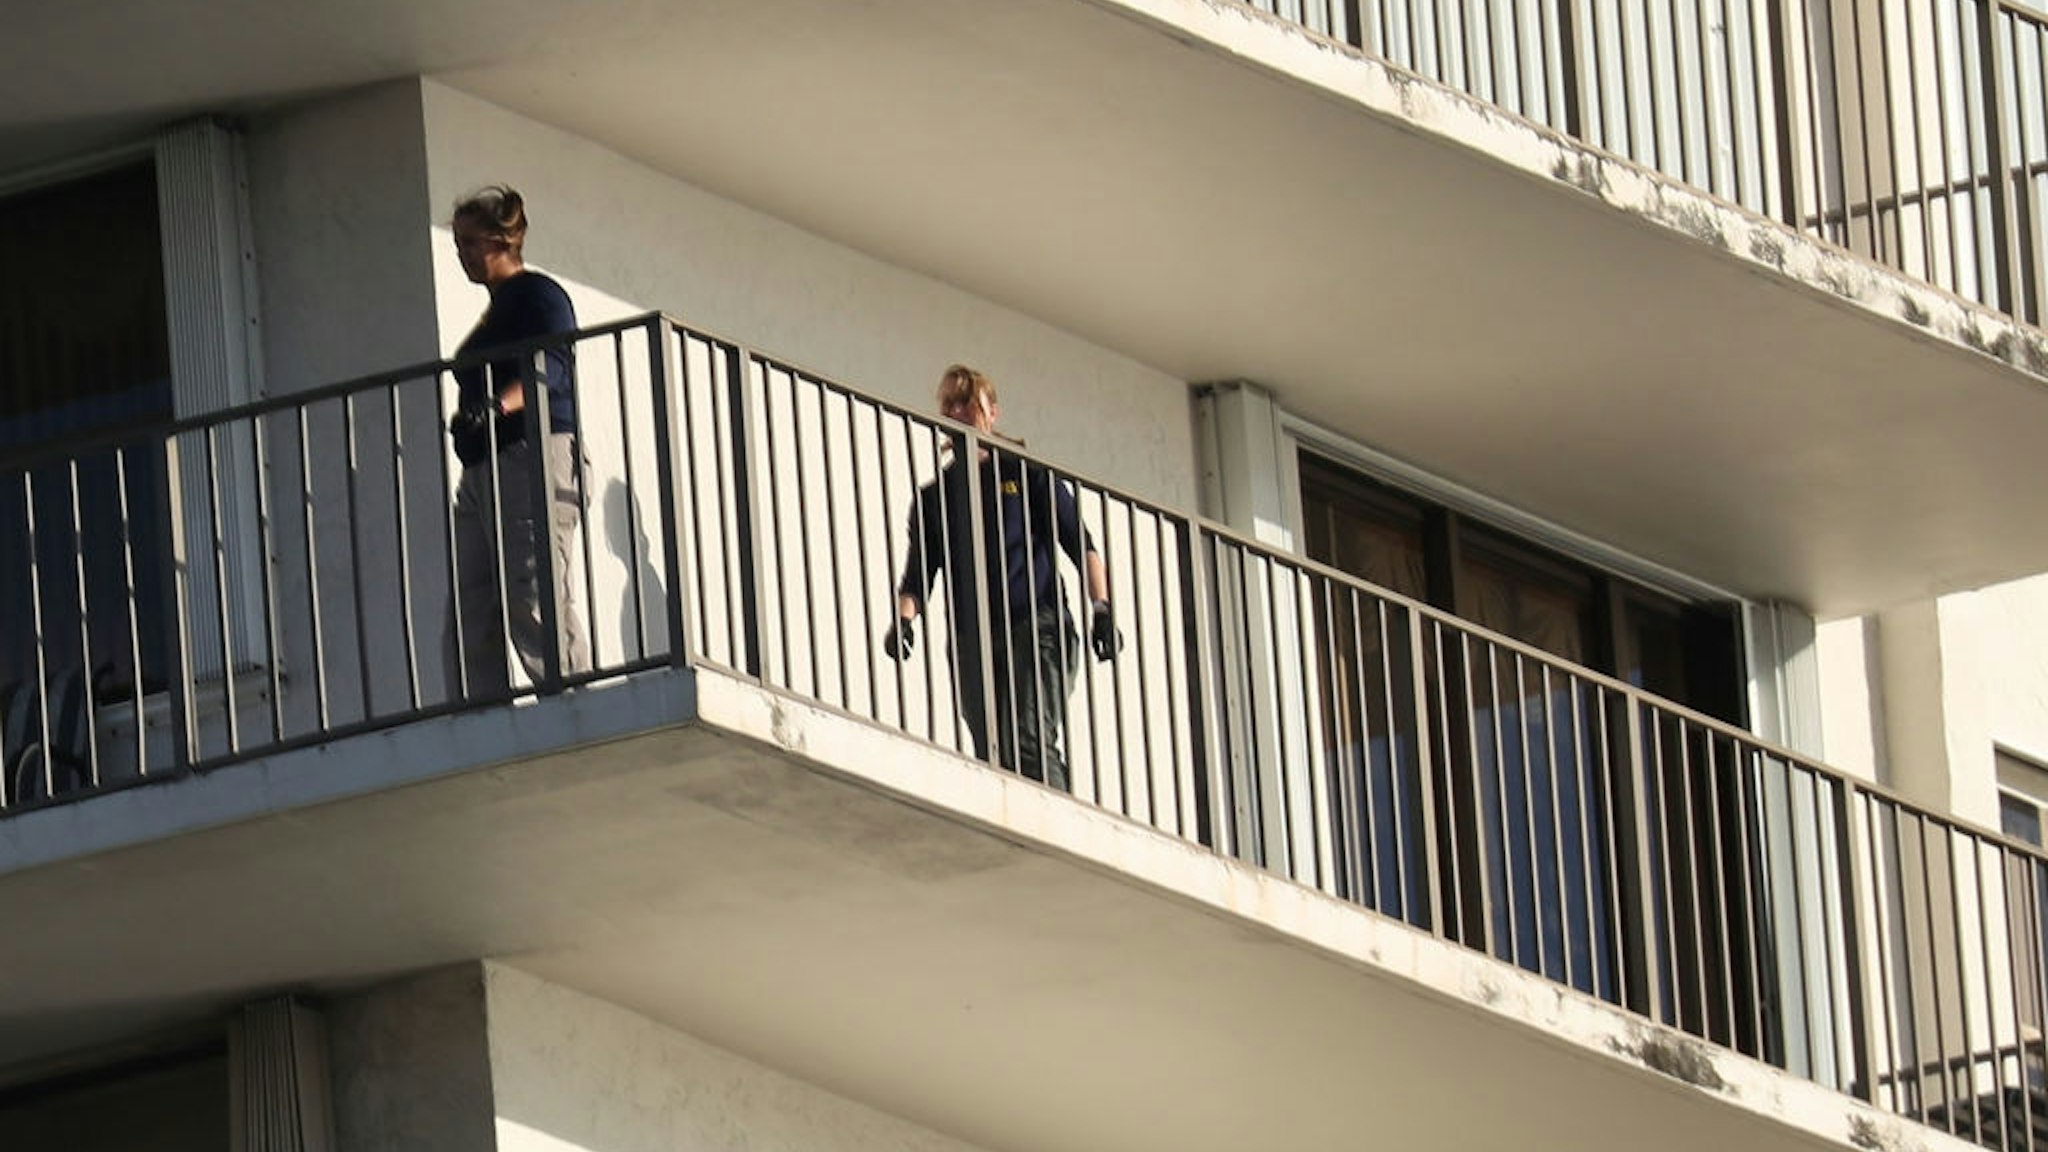 AVENTURA, FL - OCTOBER 26: FBI Agents walk on along the balcony of a condo in the building that has a possible connection to alleged bomber Cesar Sayoc and his mother on October 26, 2018 in Aventura, Florida. Mr. Sayoc was arrested today on allegations that he was the person that mailed pipe bomb devices that targeted critics of President Donald Trump and have been recovered in New York, Washington D.C., California and South Florida, all with the return address of Debbie Wassermann-Schultz's office.